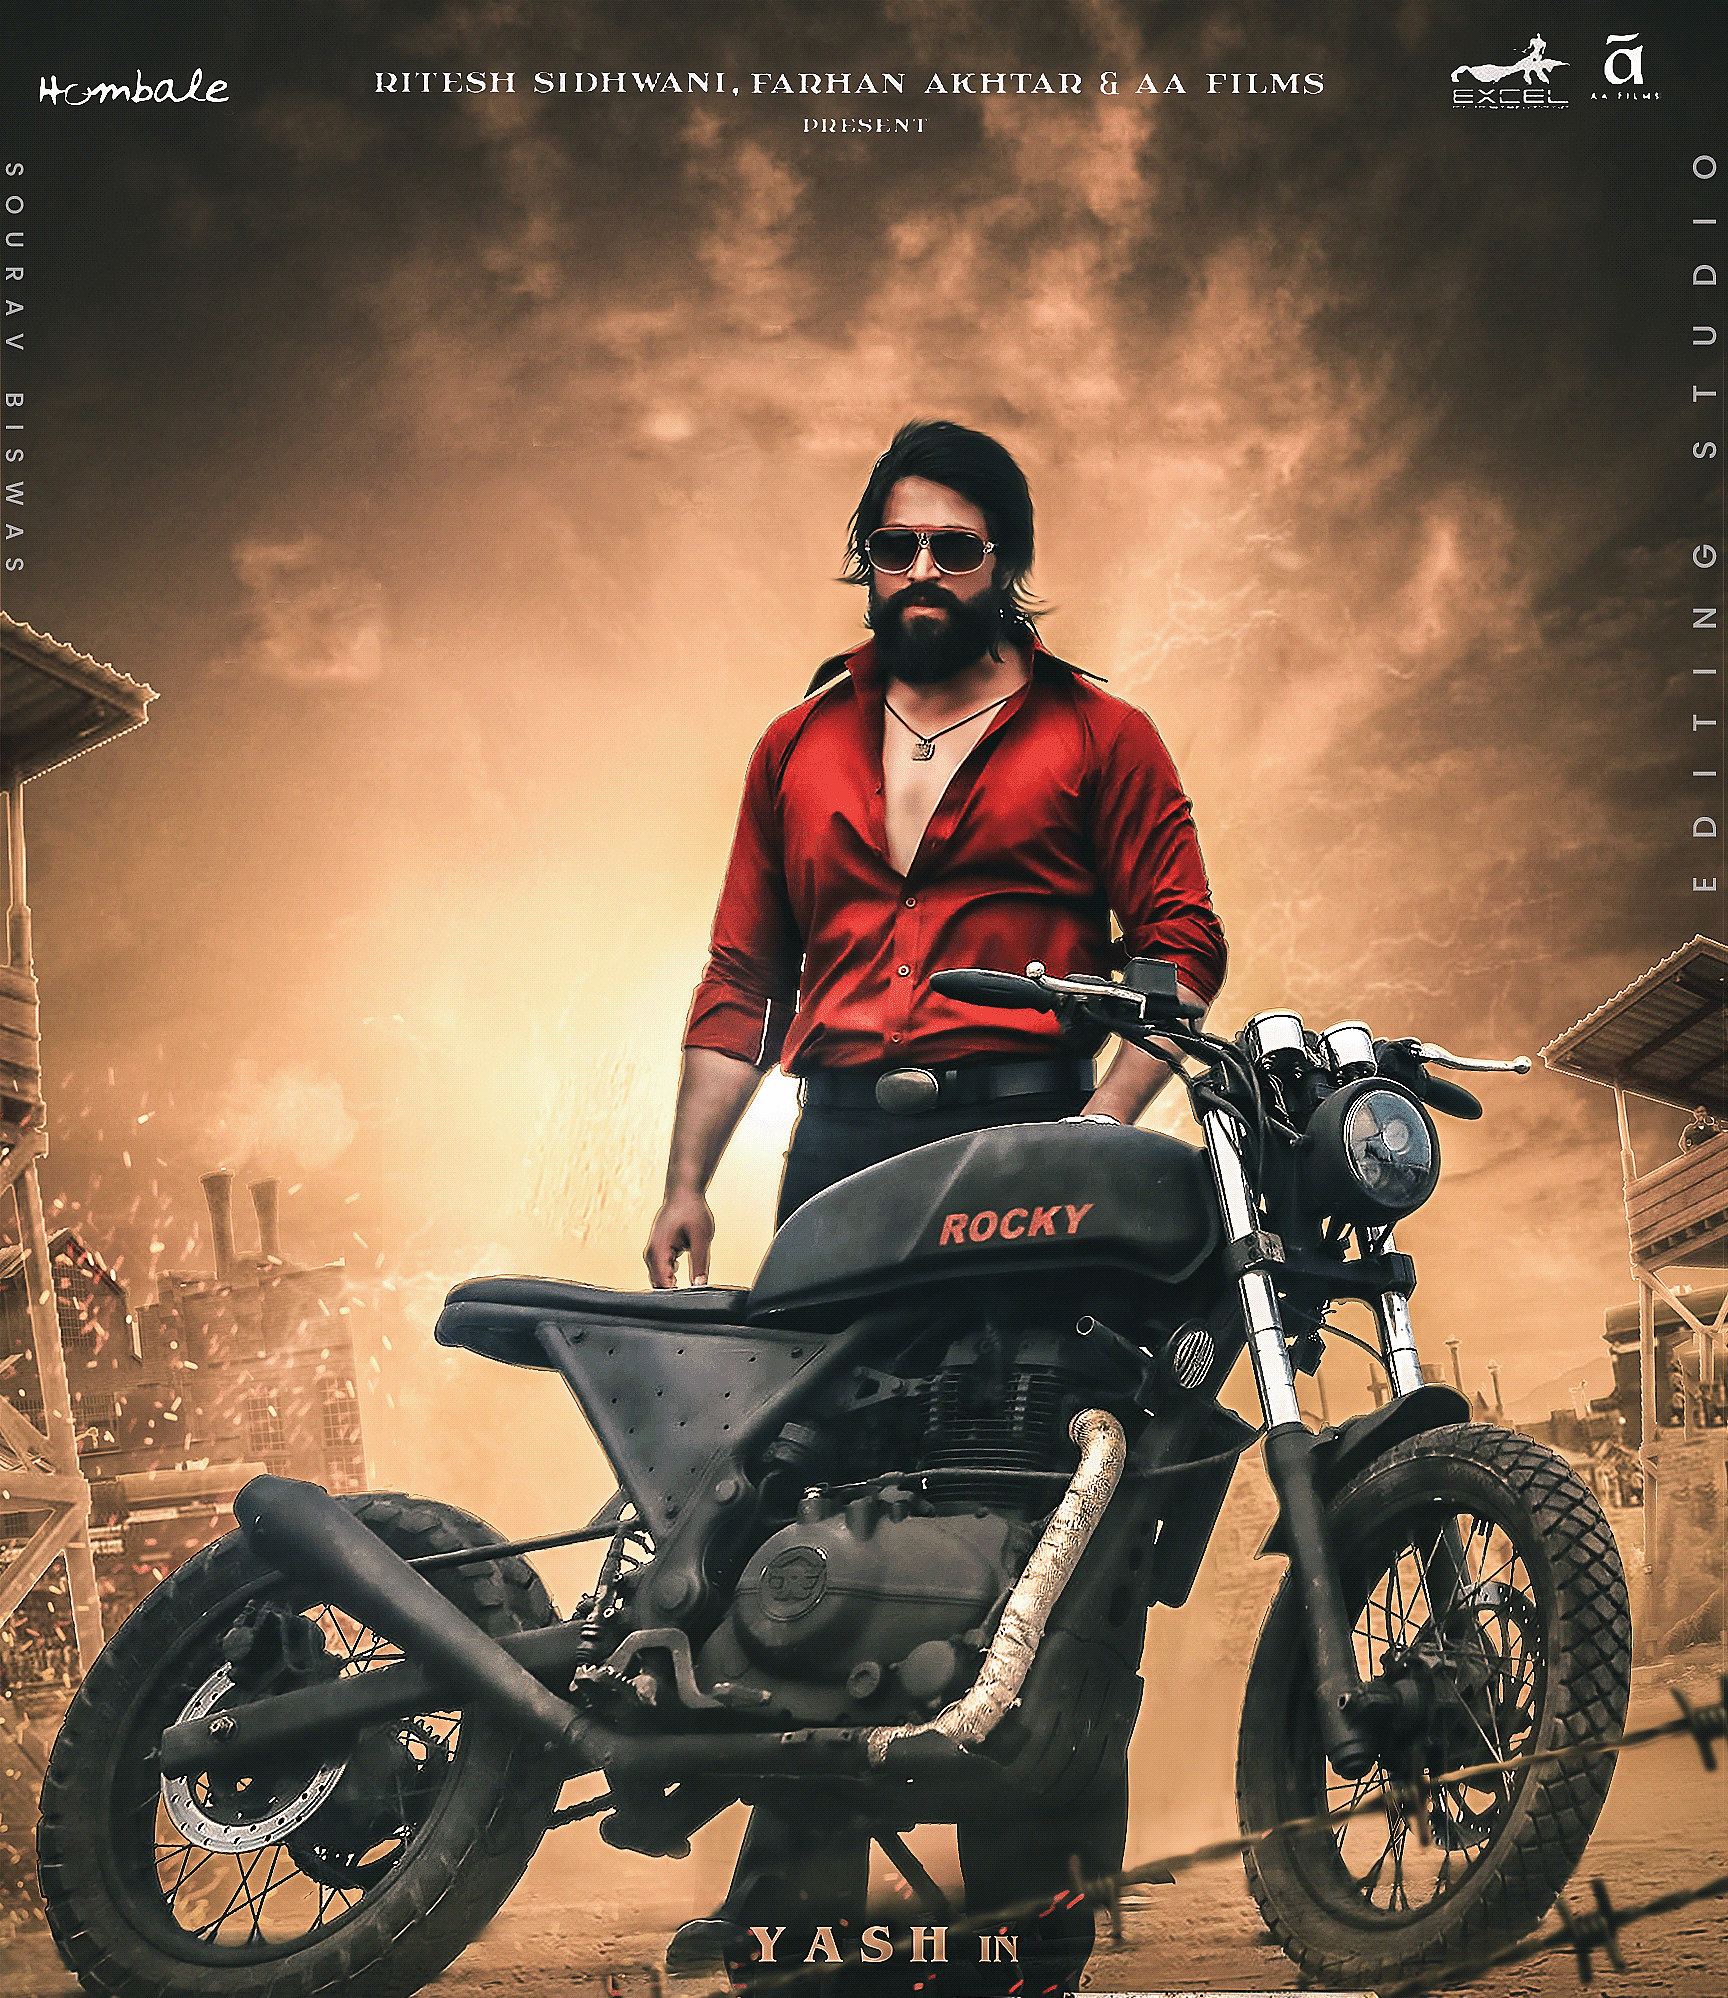 KGF Chapter 2': Fans in Kerala show craze for film with creative fan art of  actor Yash- Republic World